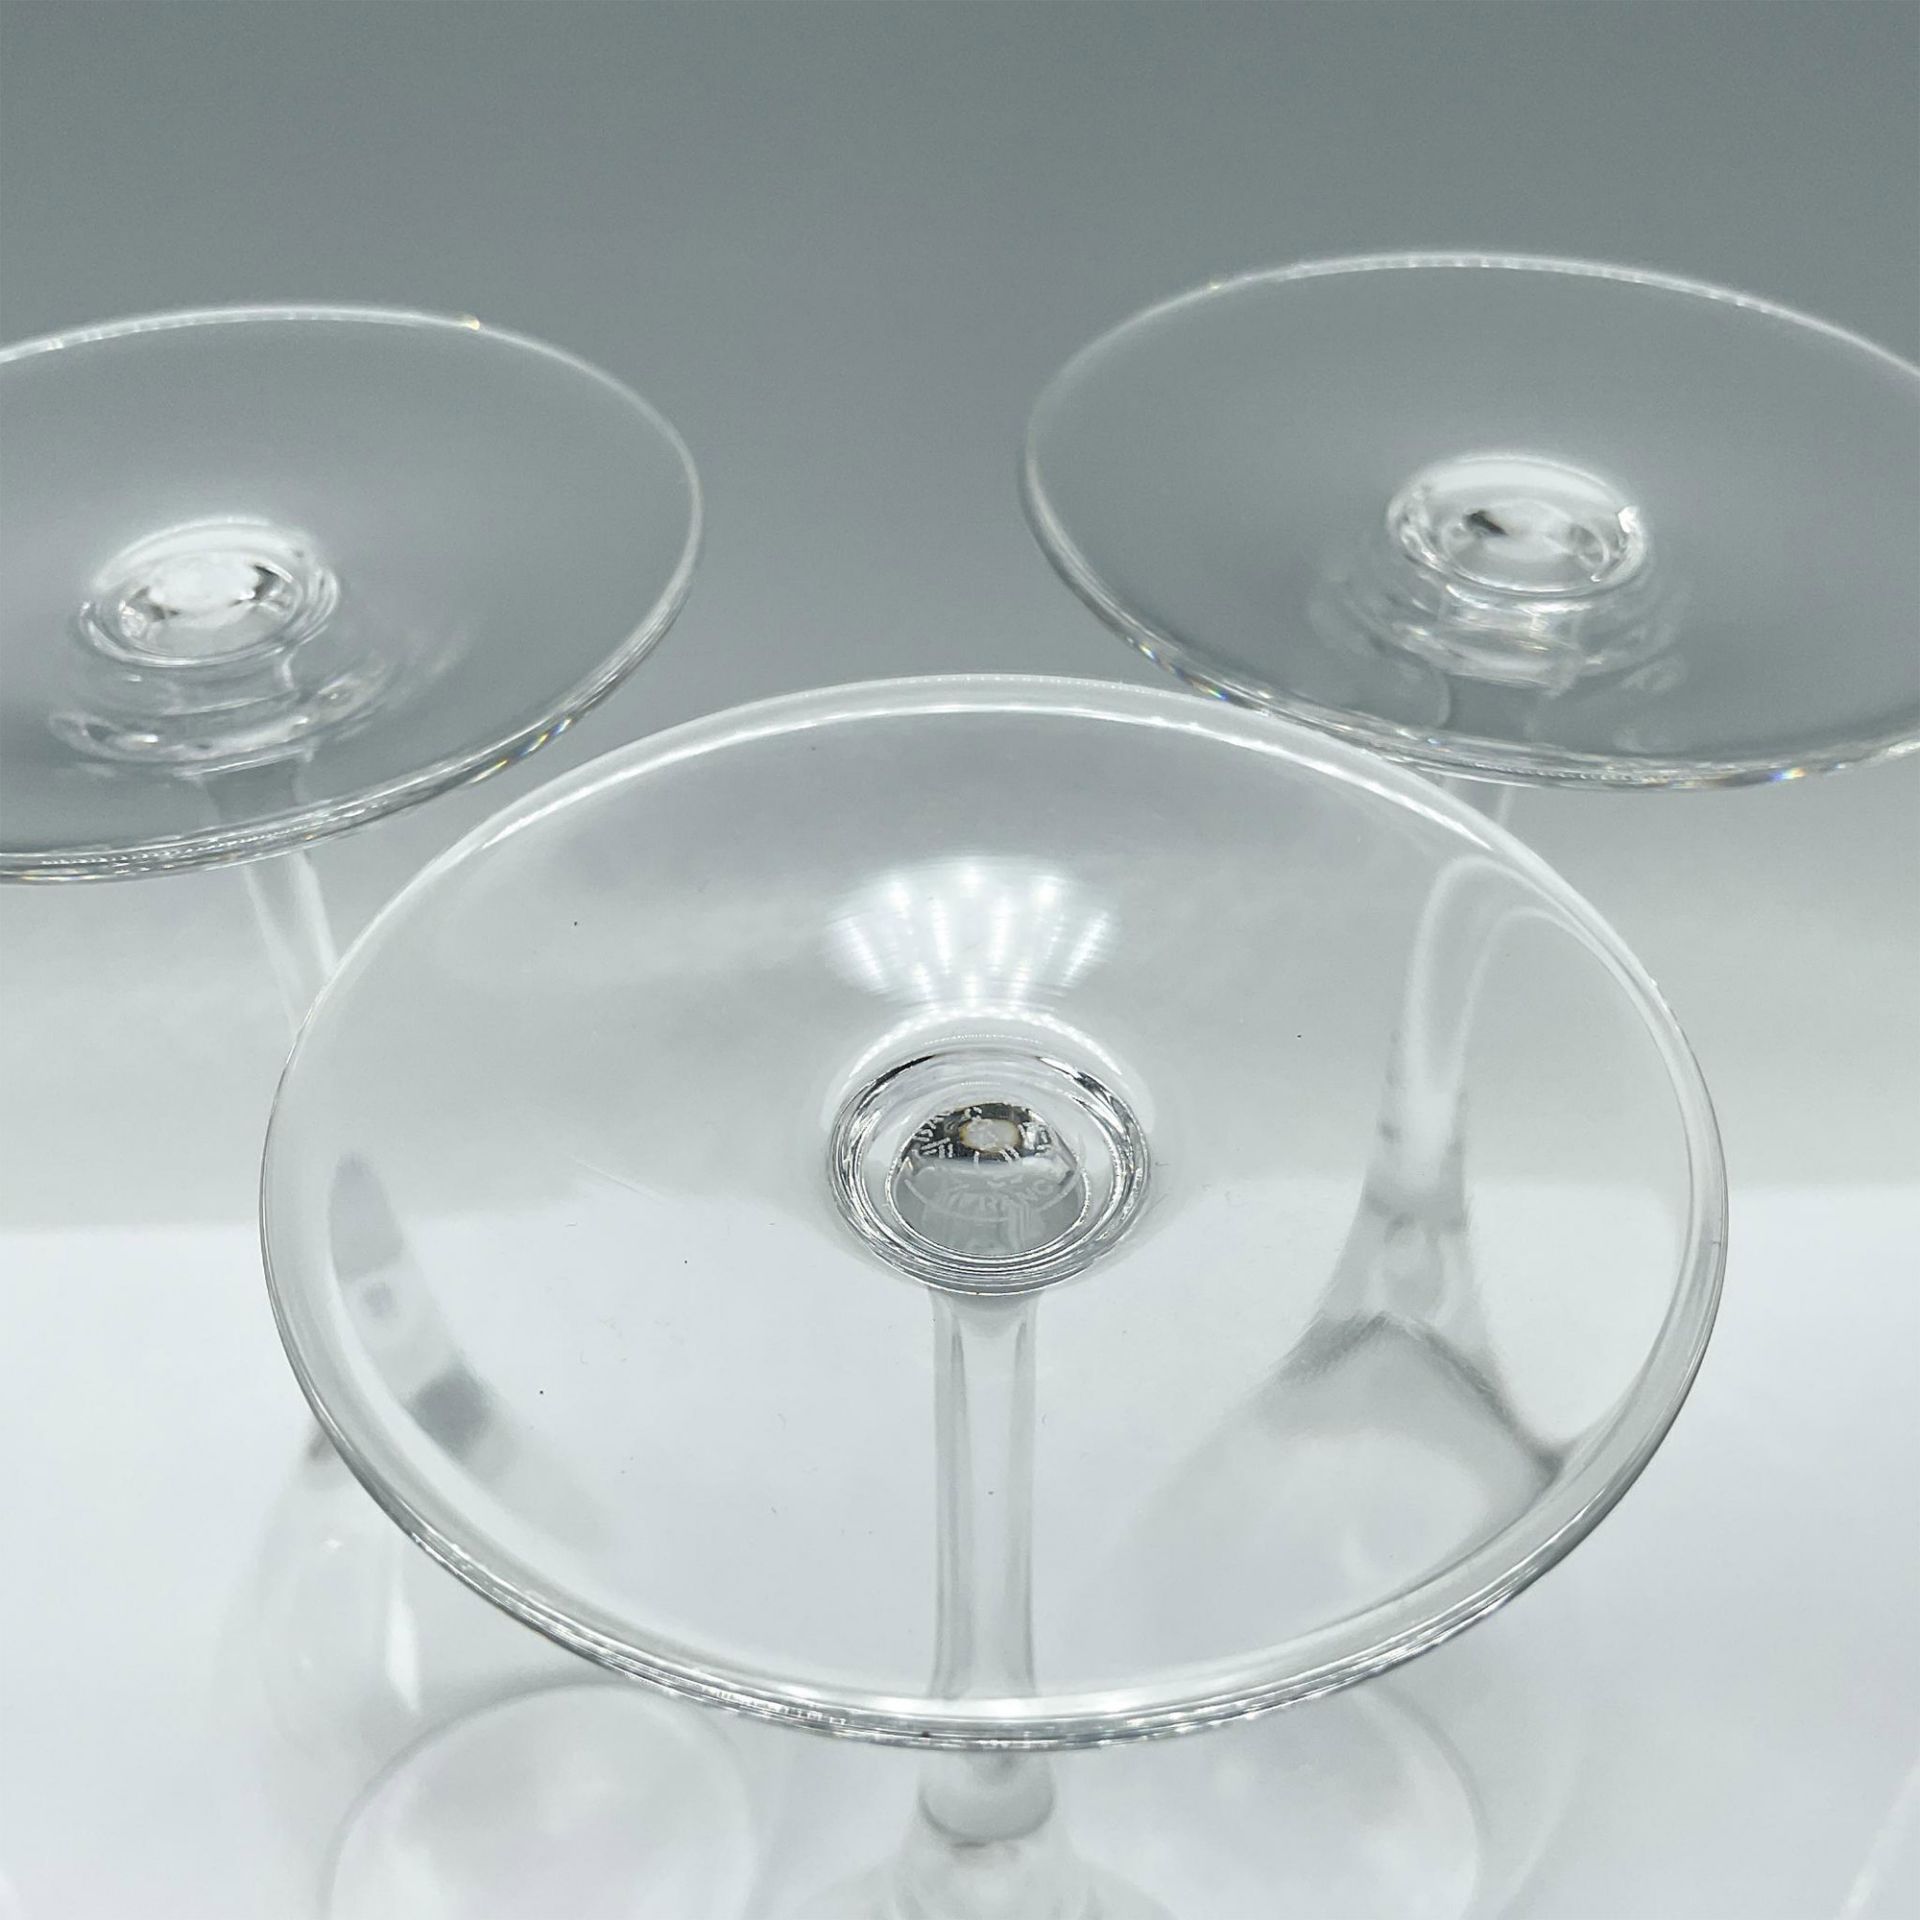 3pc Baccarat Sparkling Wine Glasses - Image 3 of 3